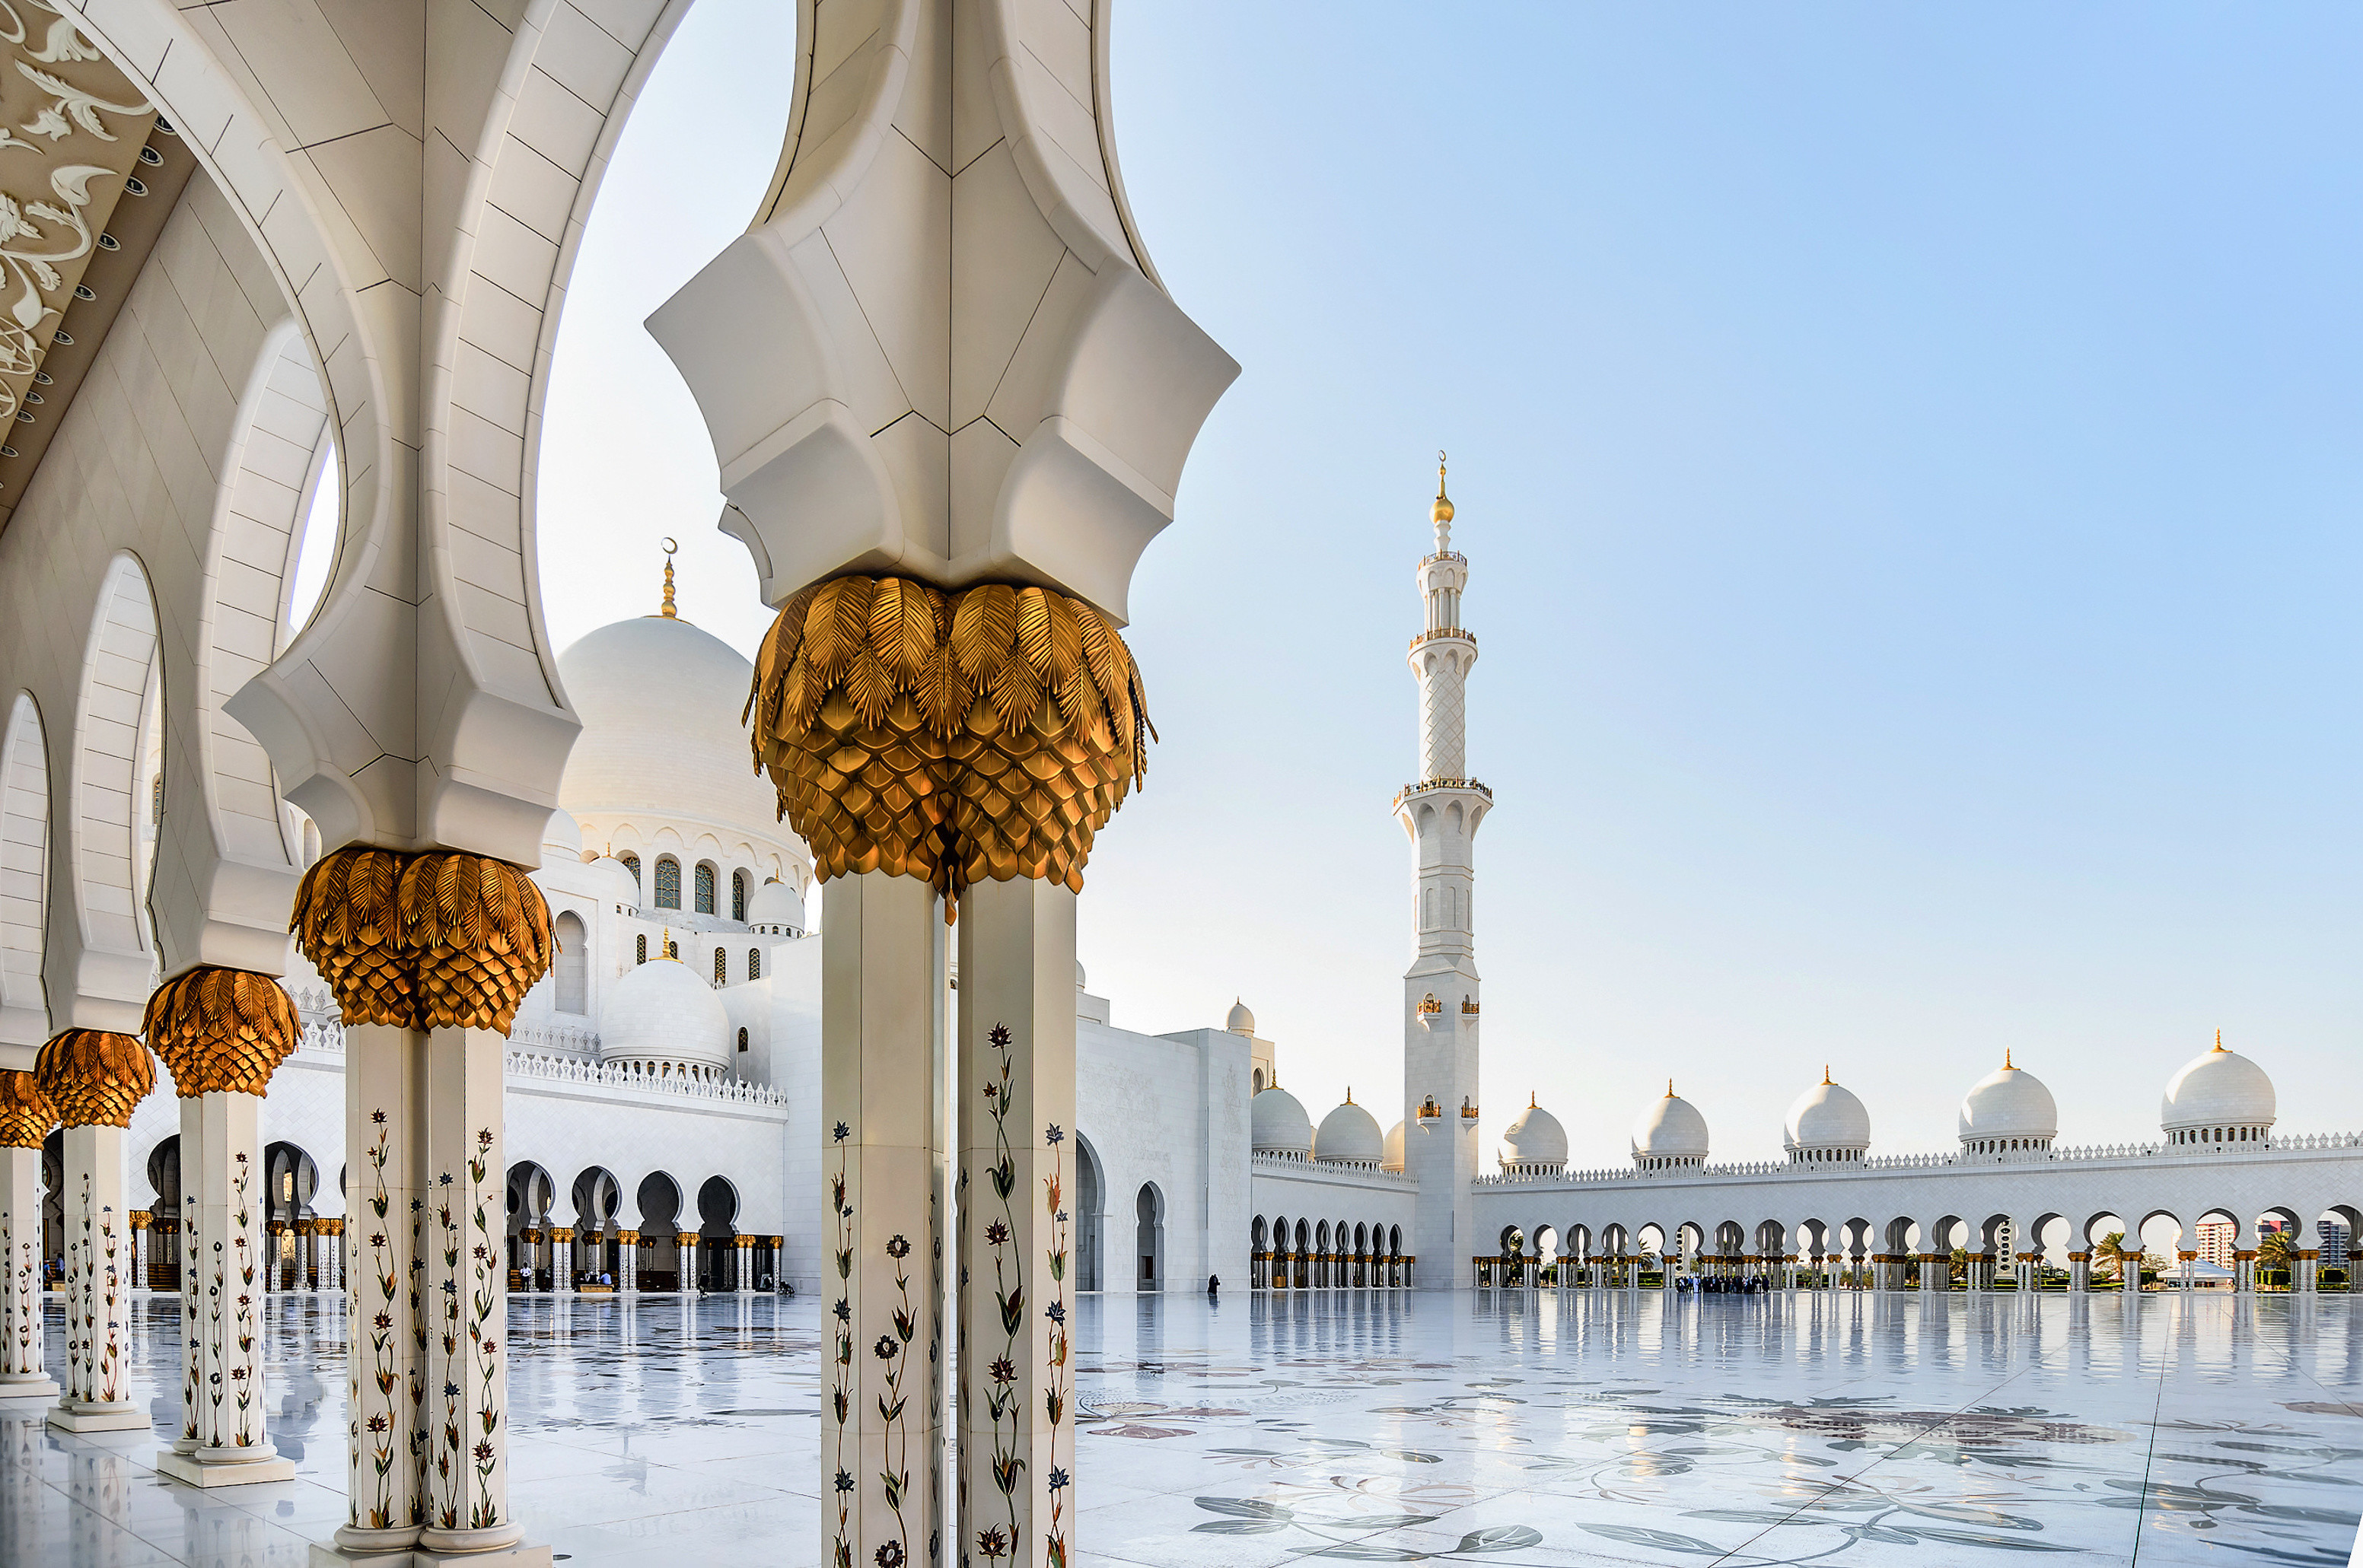 Sheikh Zayed Grand Mosque Hd Wallpaper Background Image 3105x2061 Id 773181 Wallpaper Abyss 3105x2061